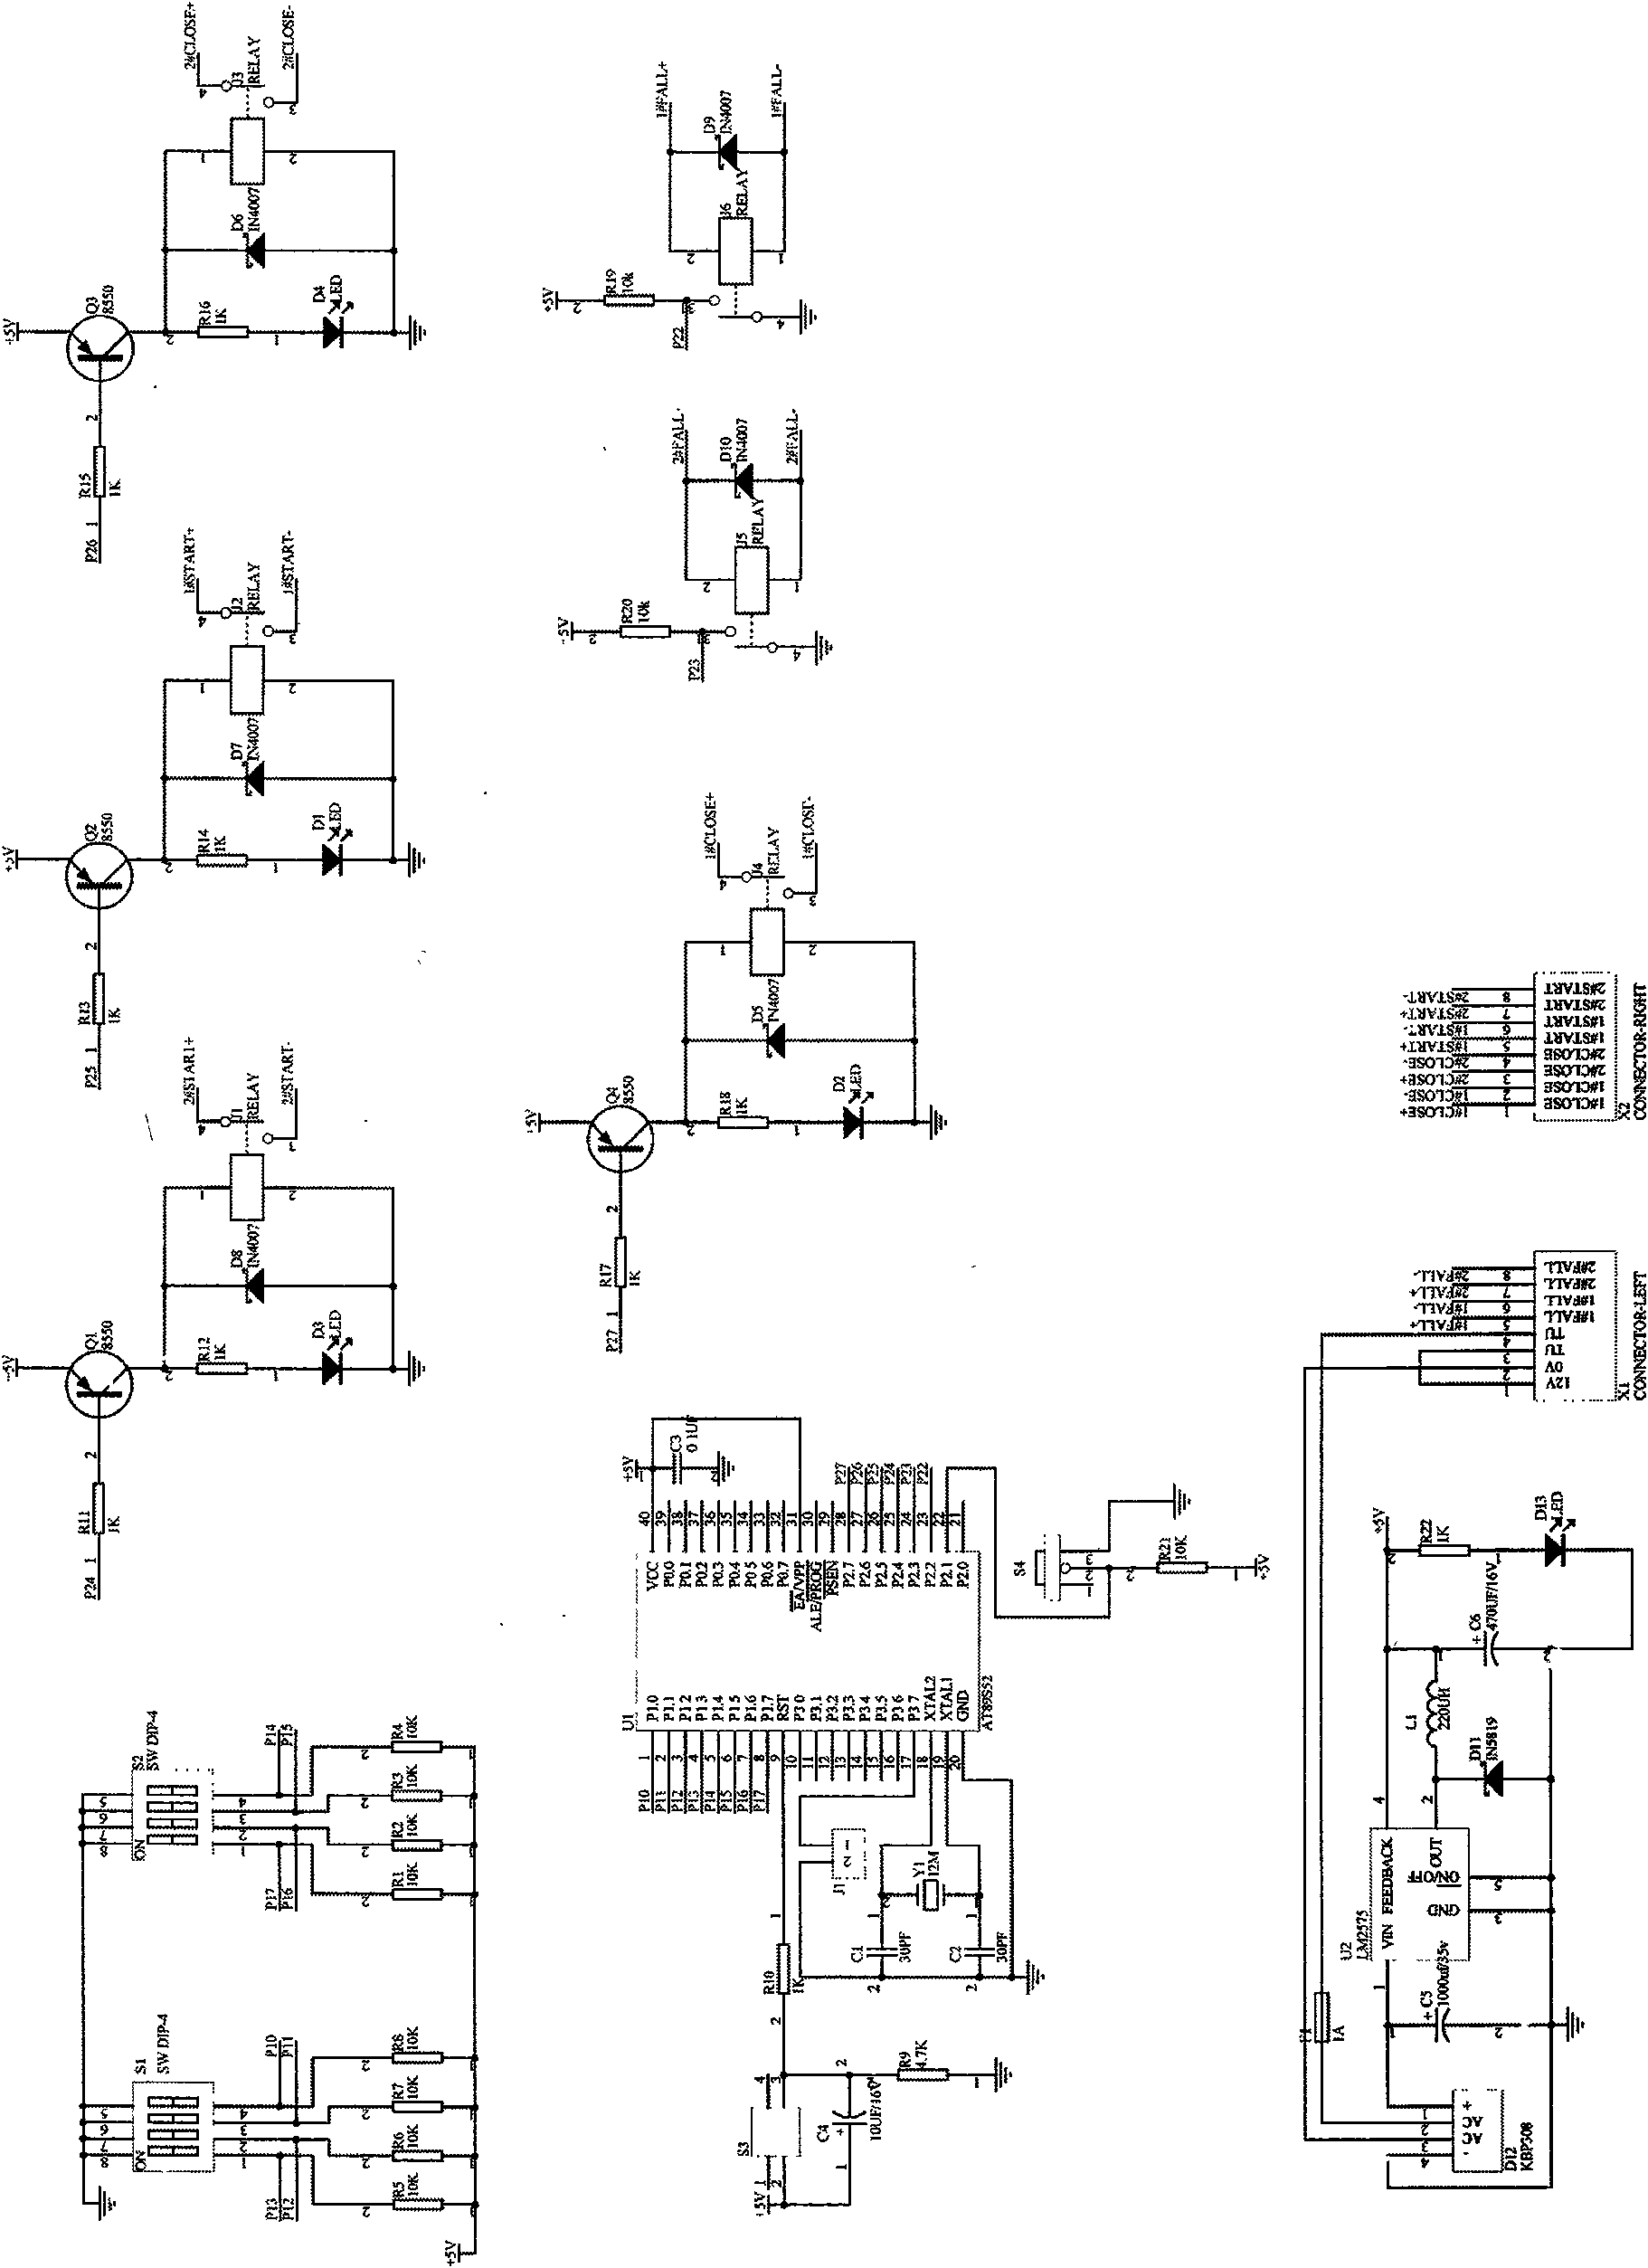 Timing switching controller of double machines